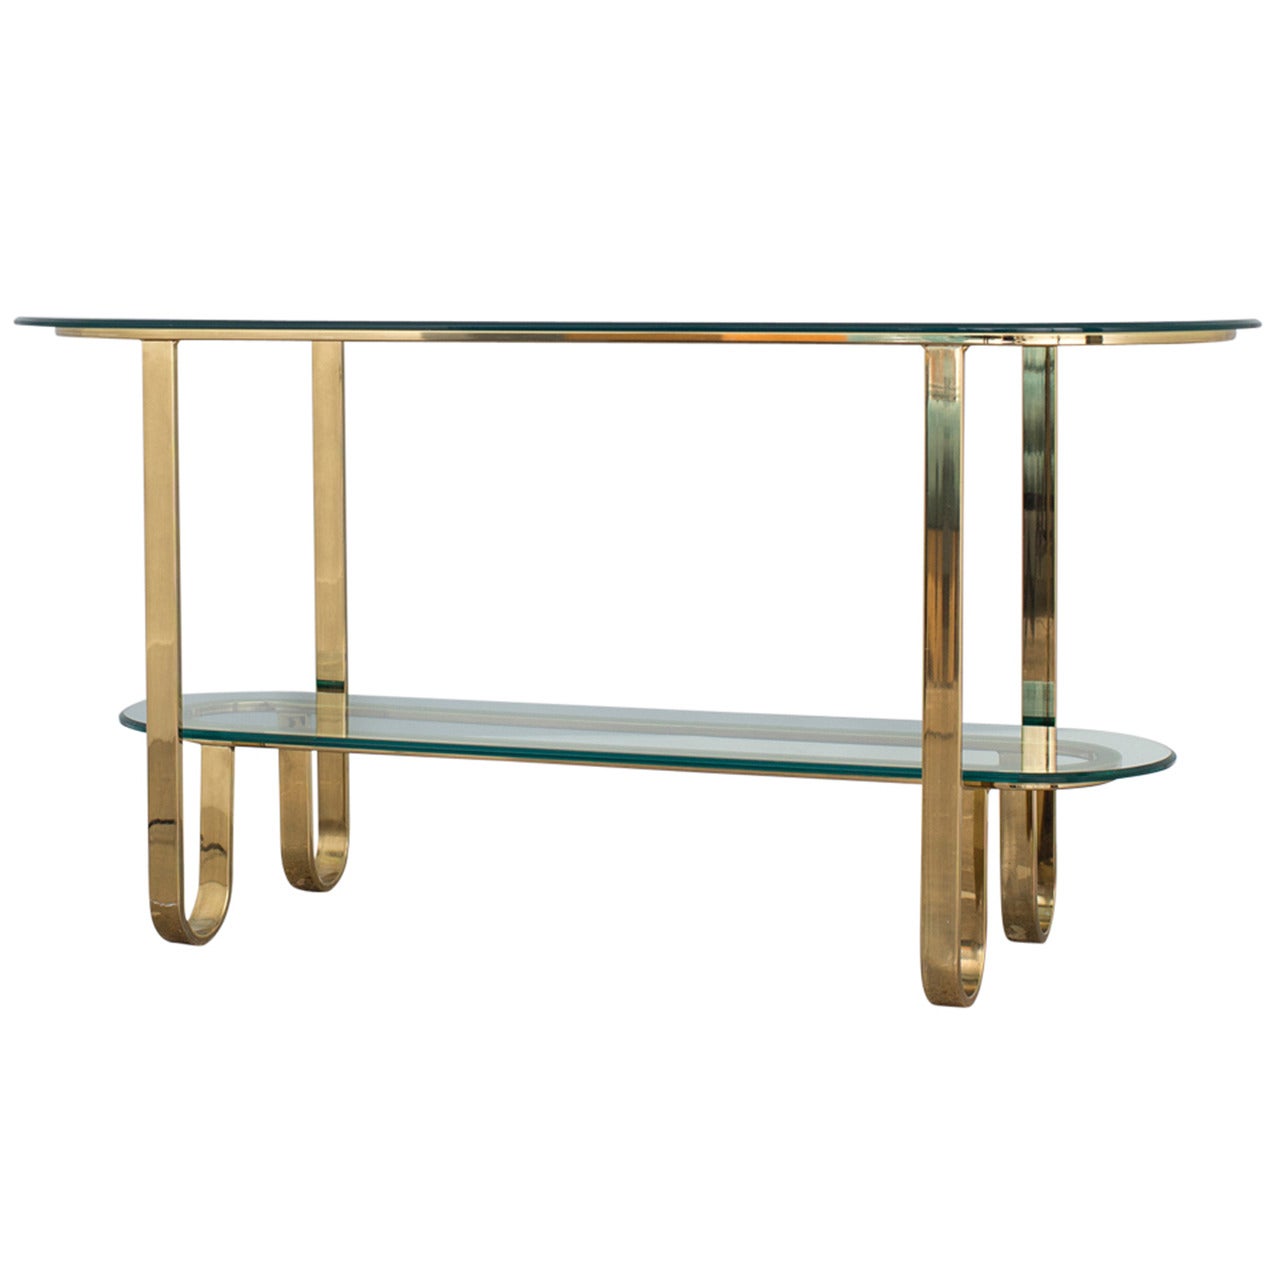 Design Institute of America Brass and Glass Console Table